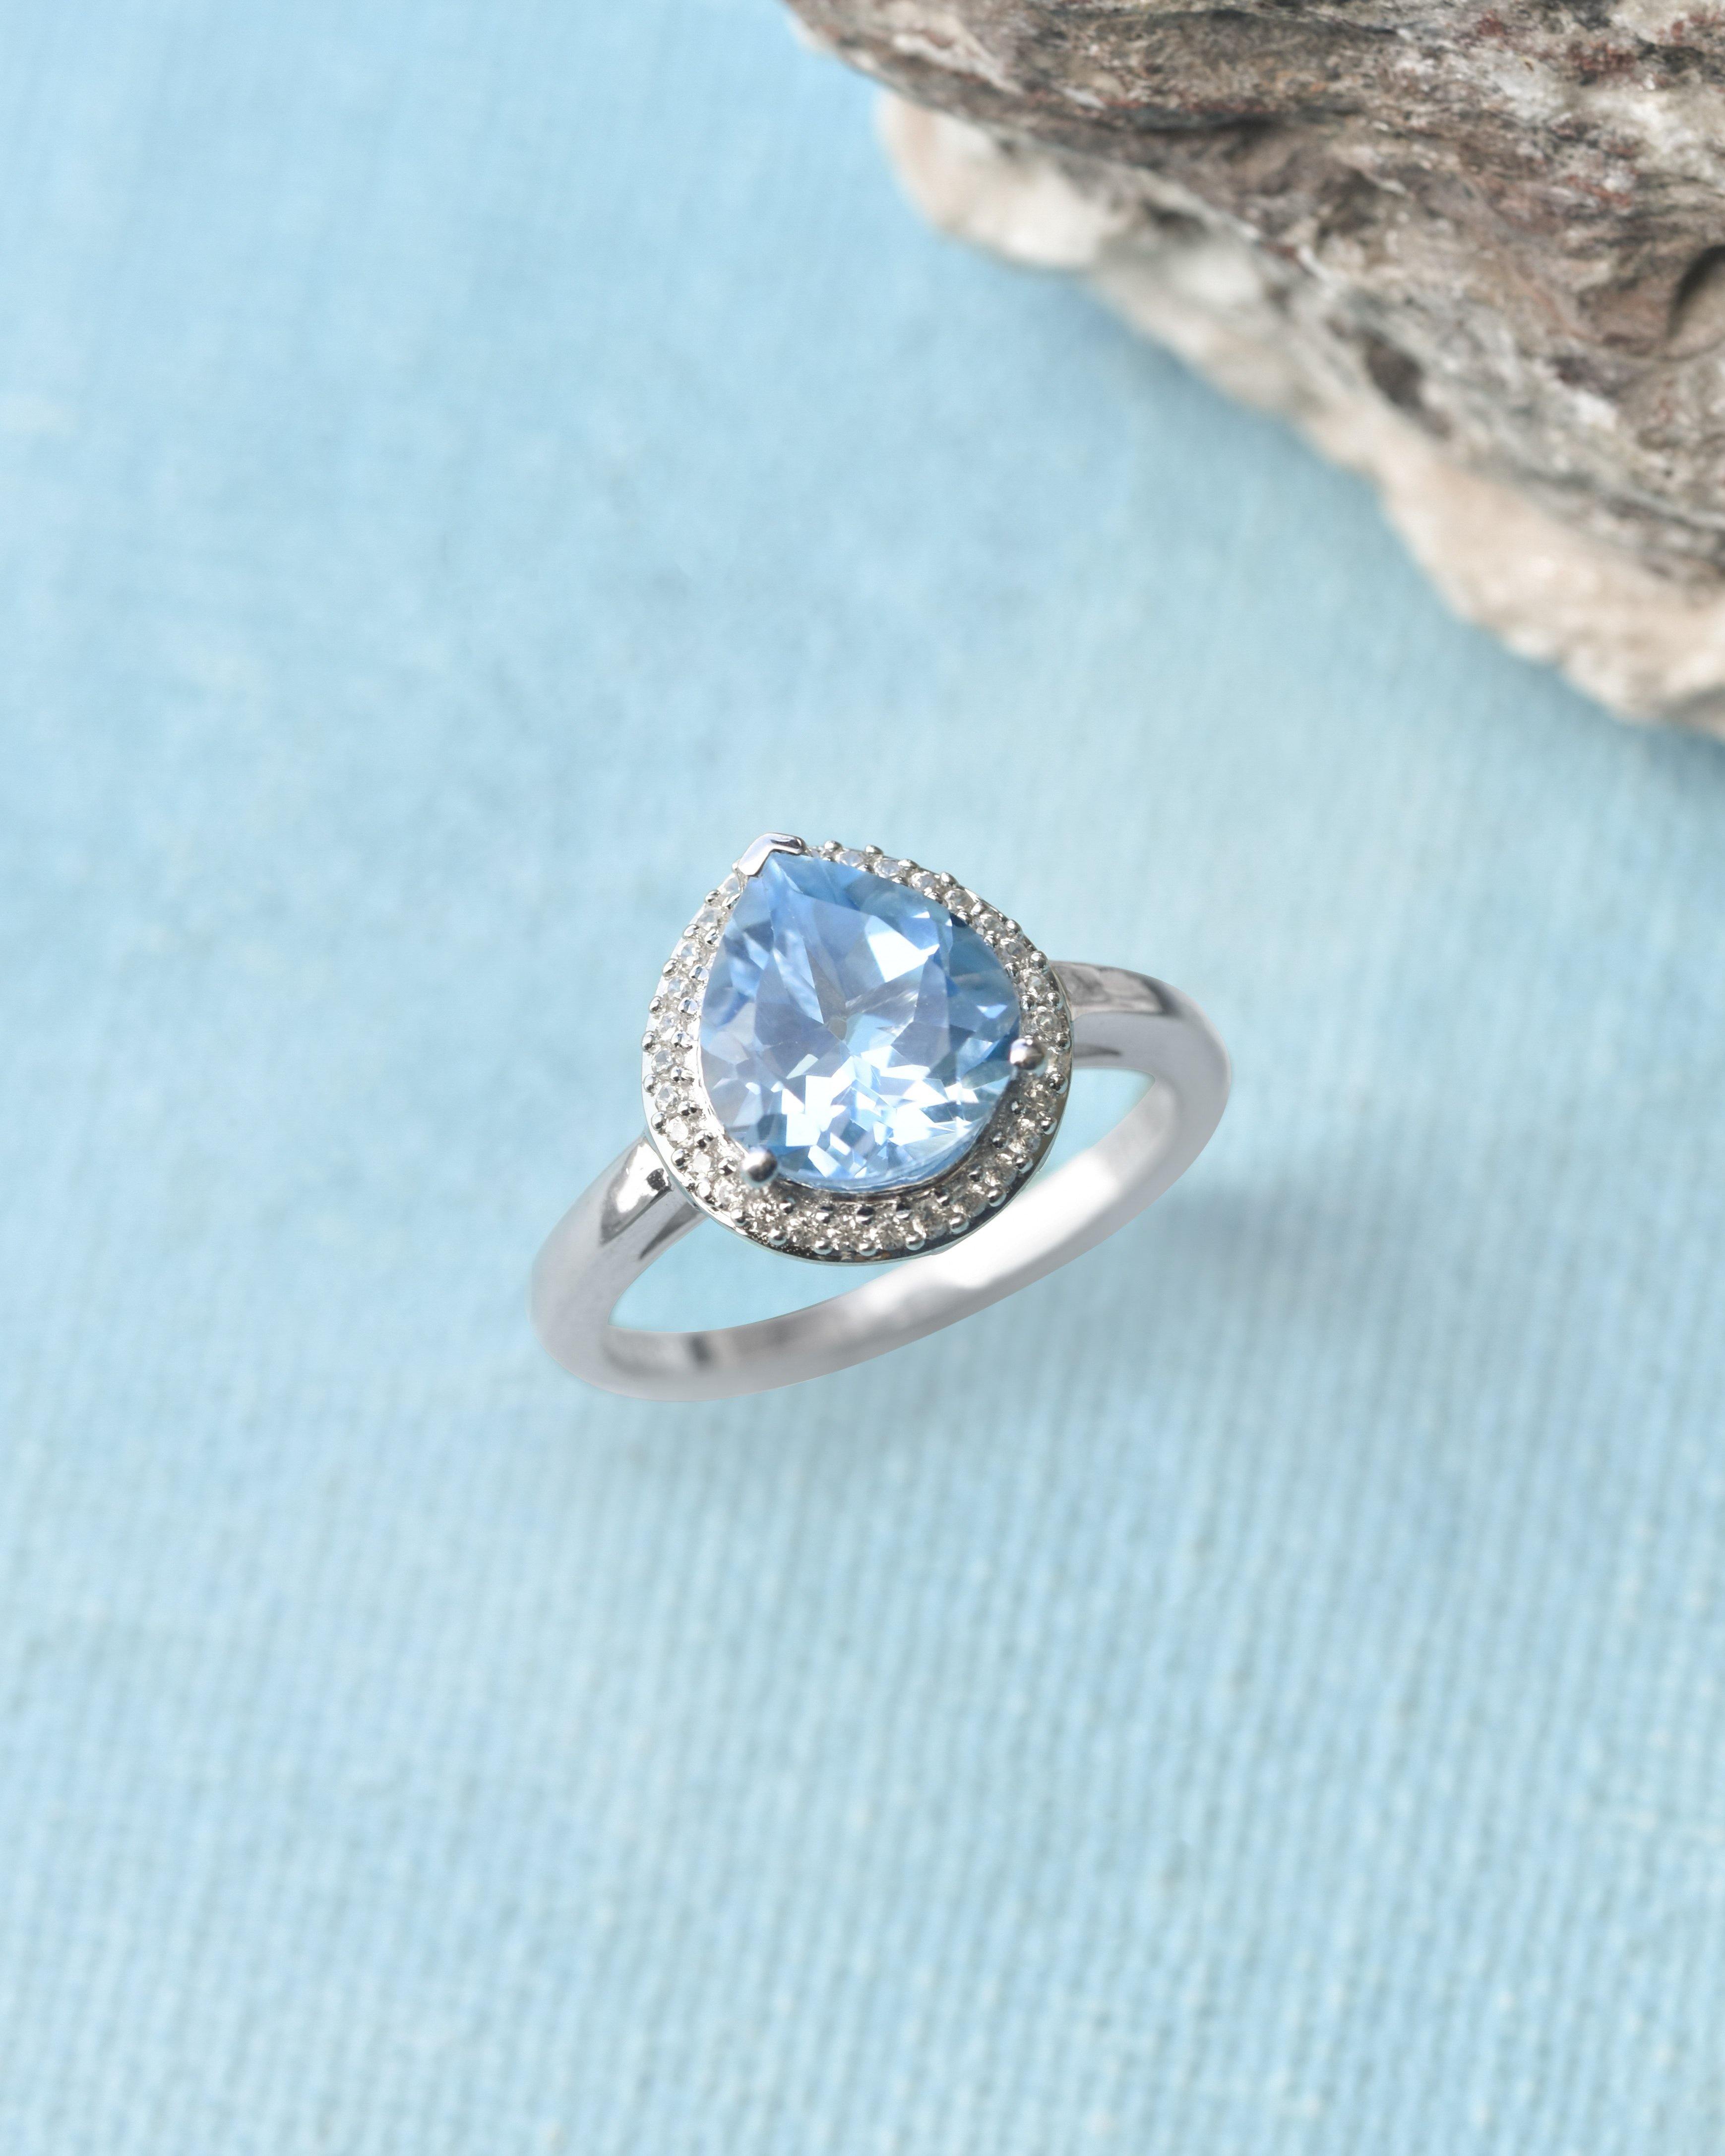 3.61 Ct. Sky Blue Topaz Solid 925 Sterling Silver Ring Jewelry - YoTreasure